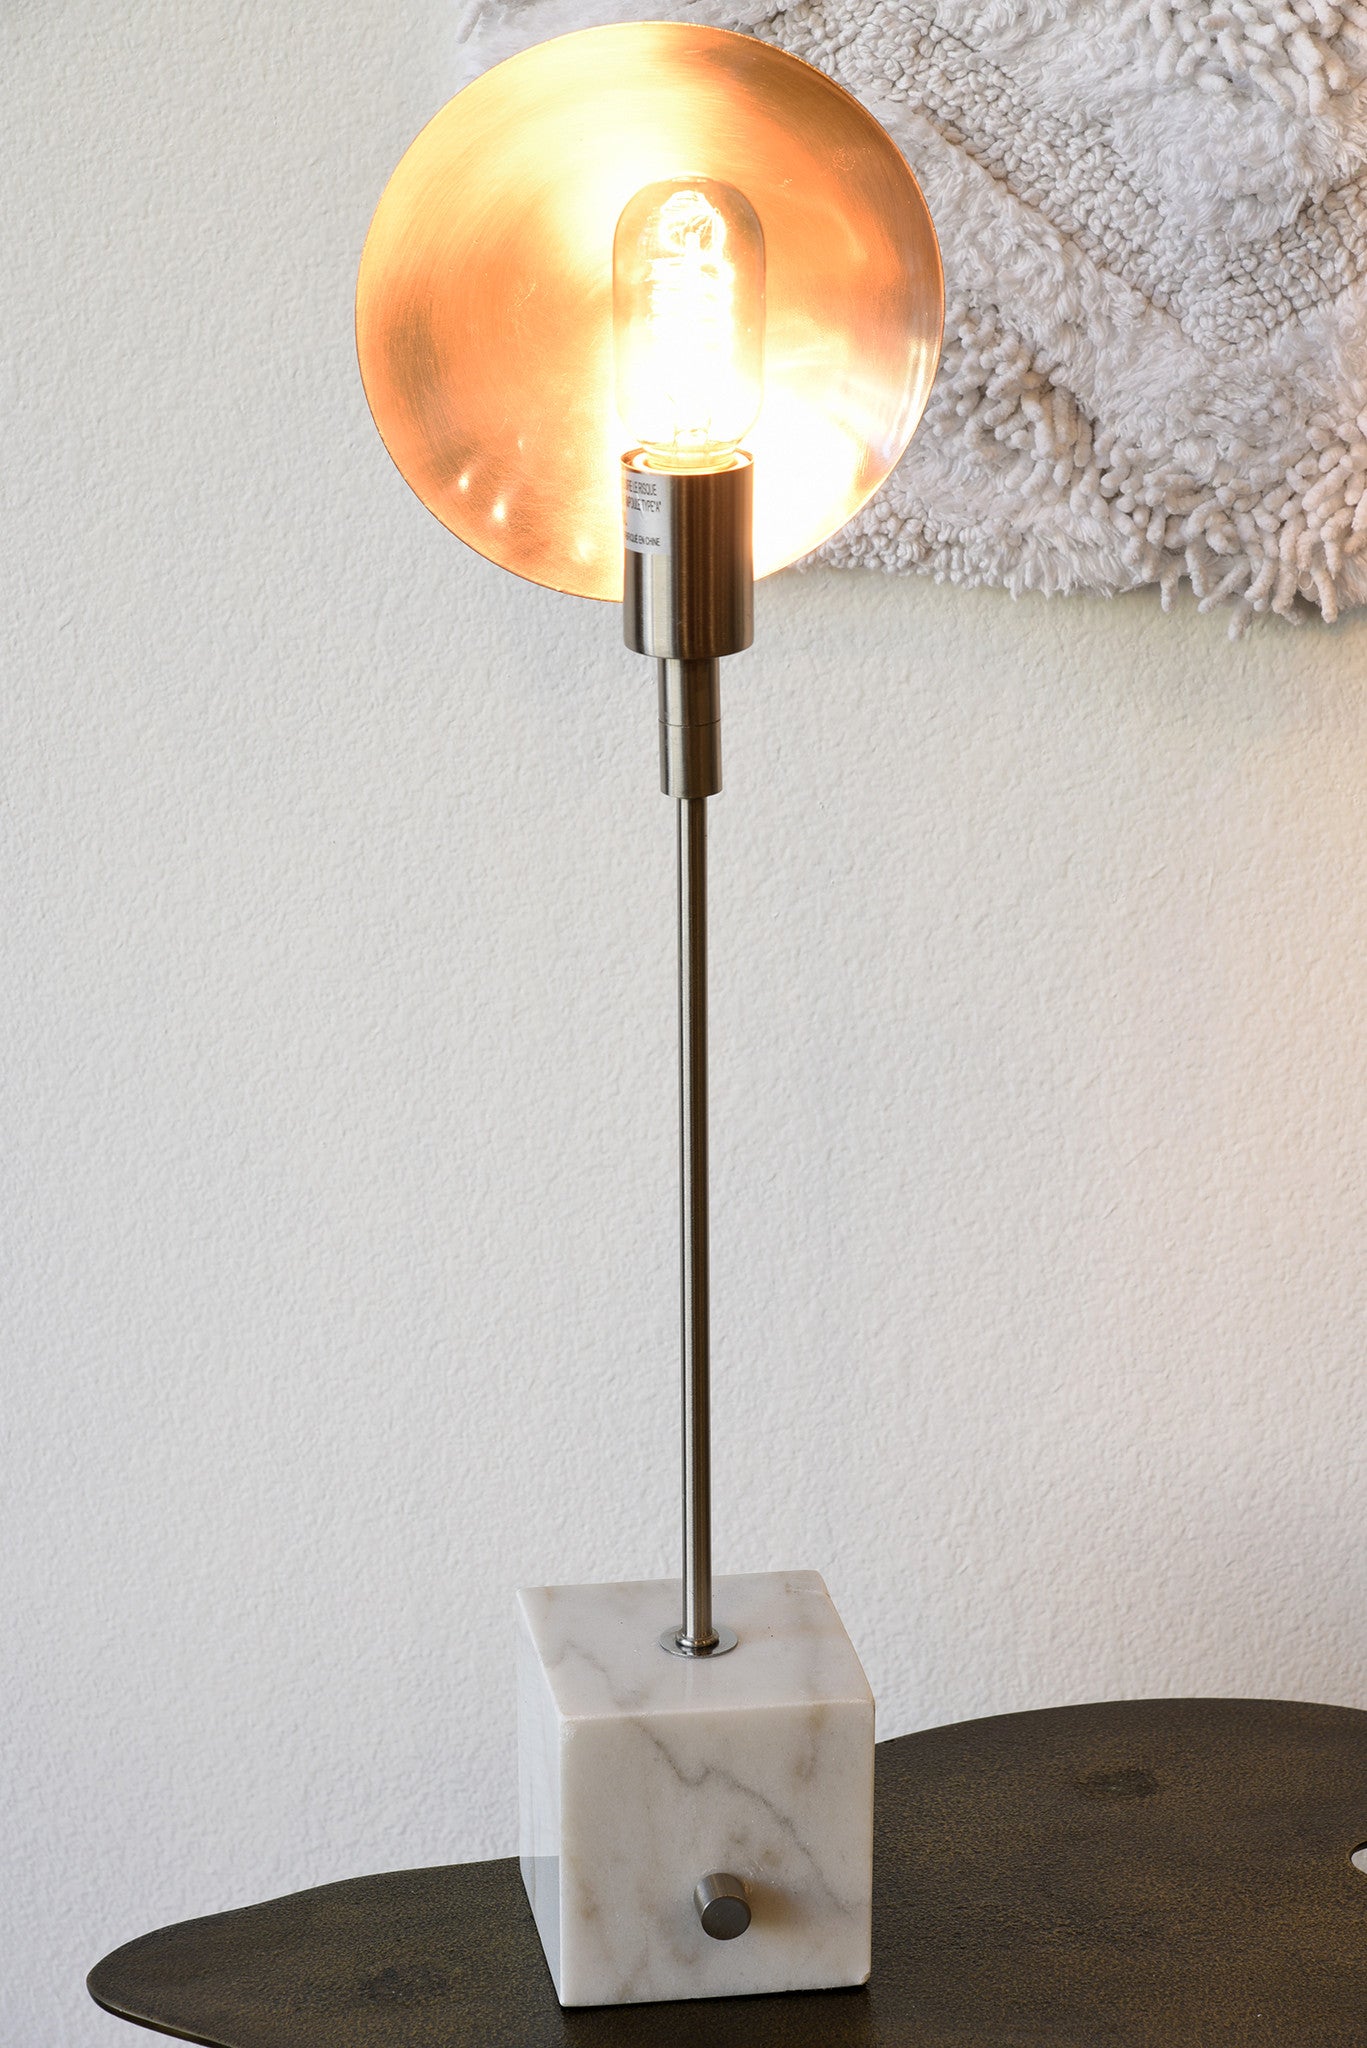 Marble and Nickel Edison Reflector Table Lamp